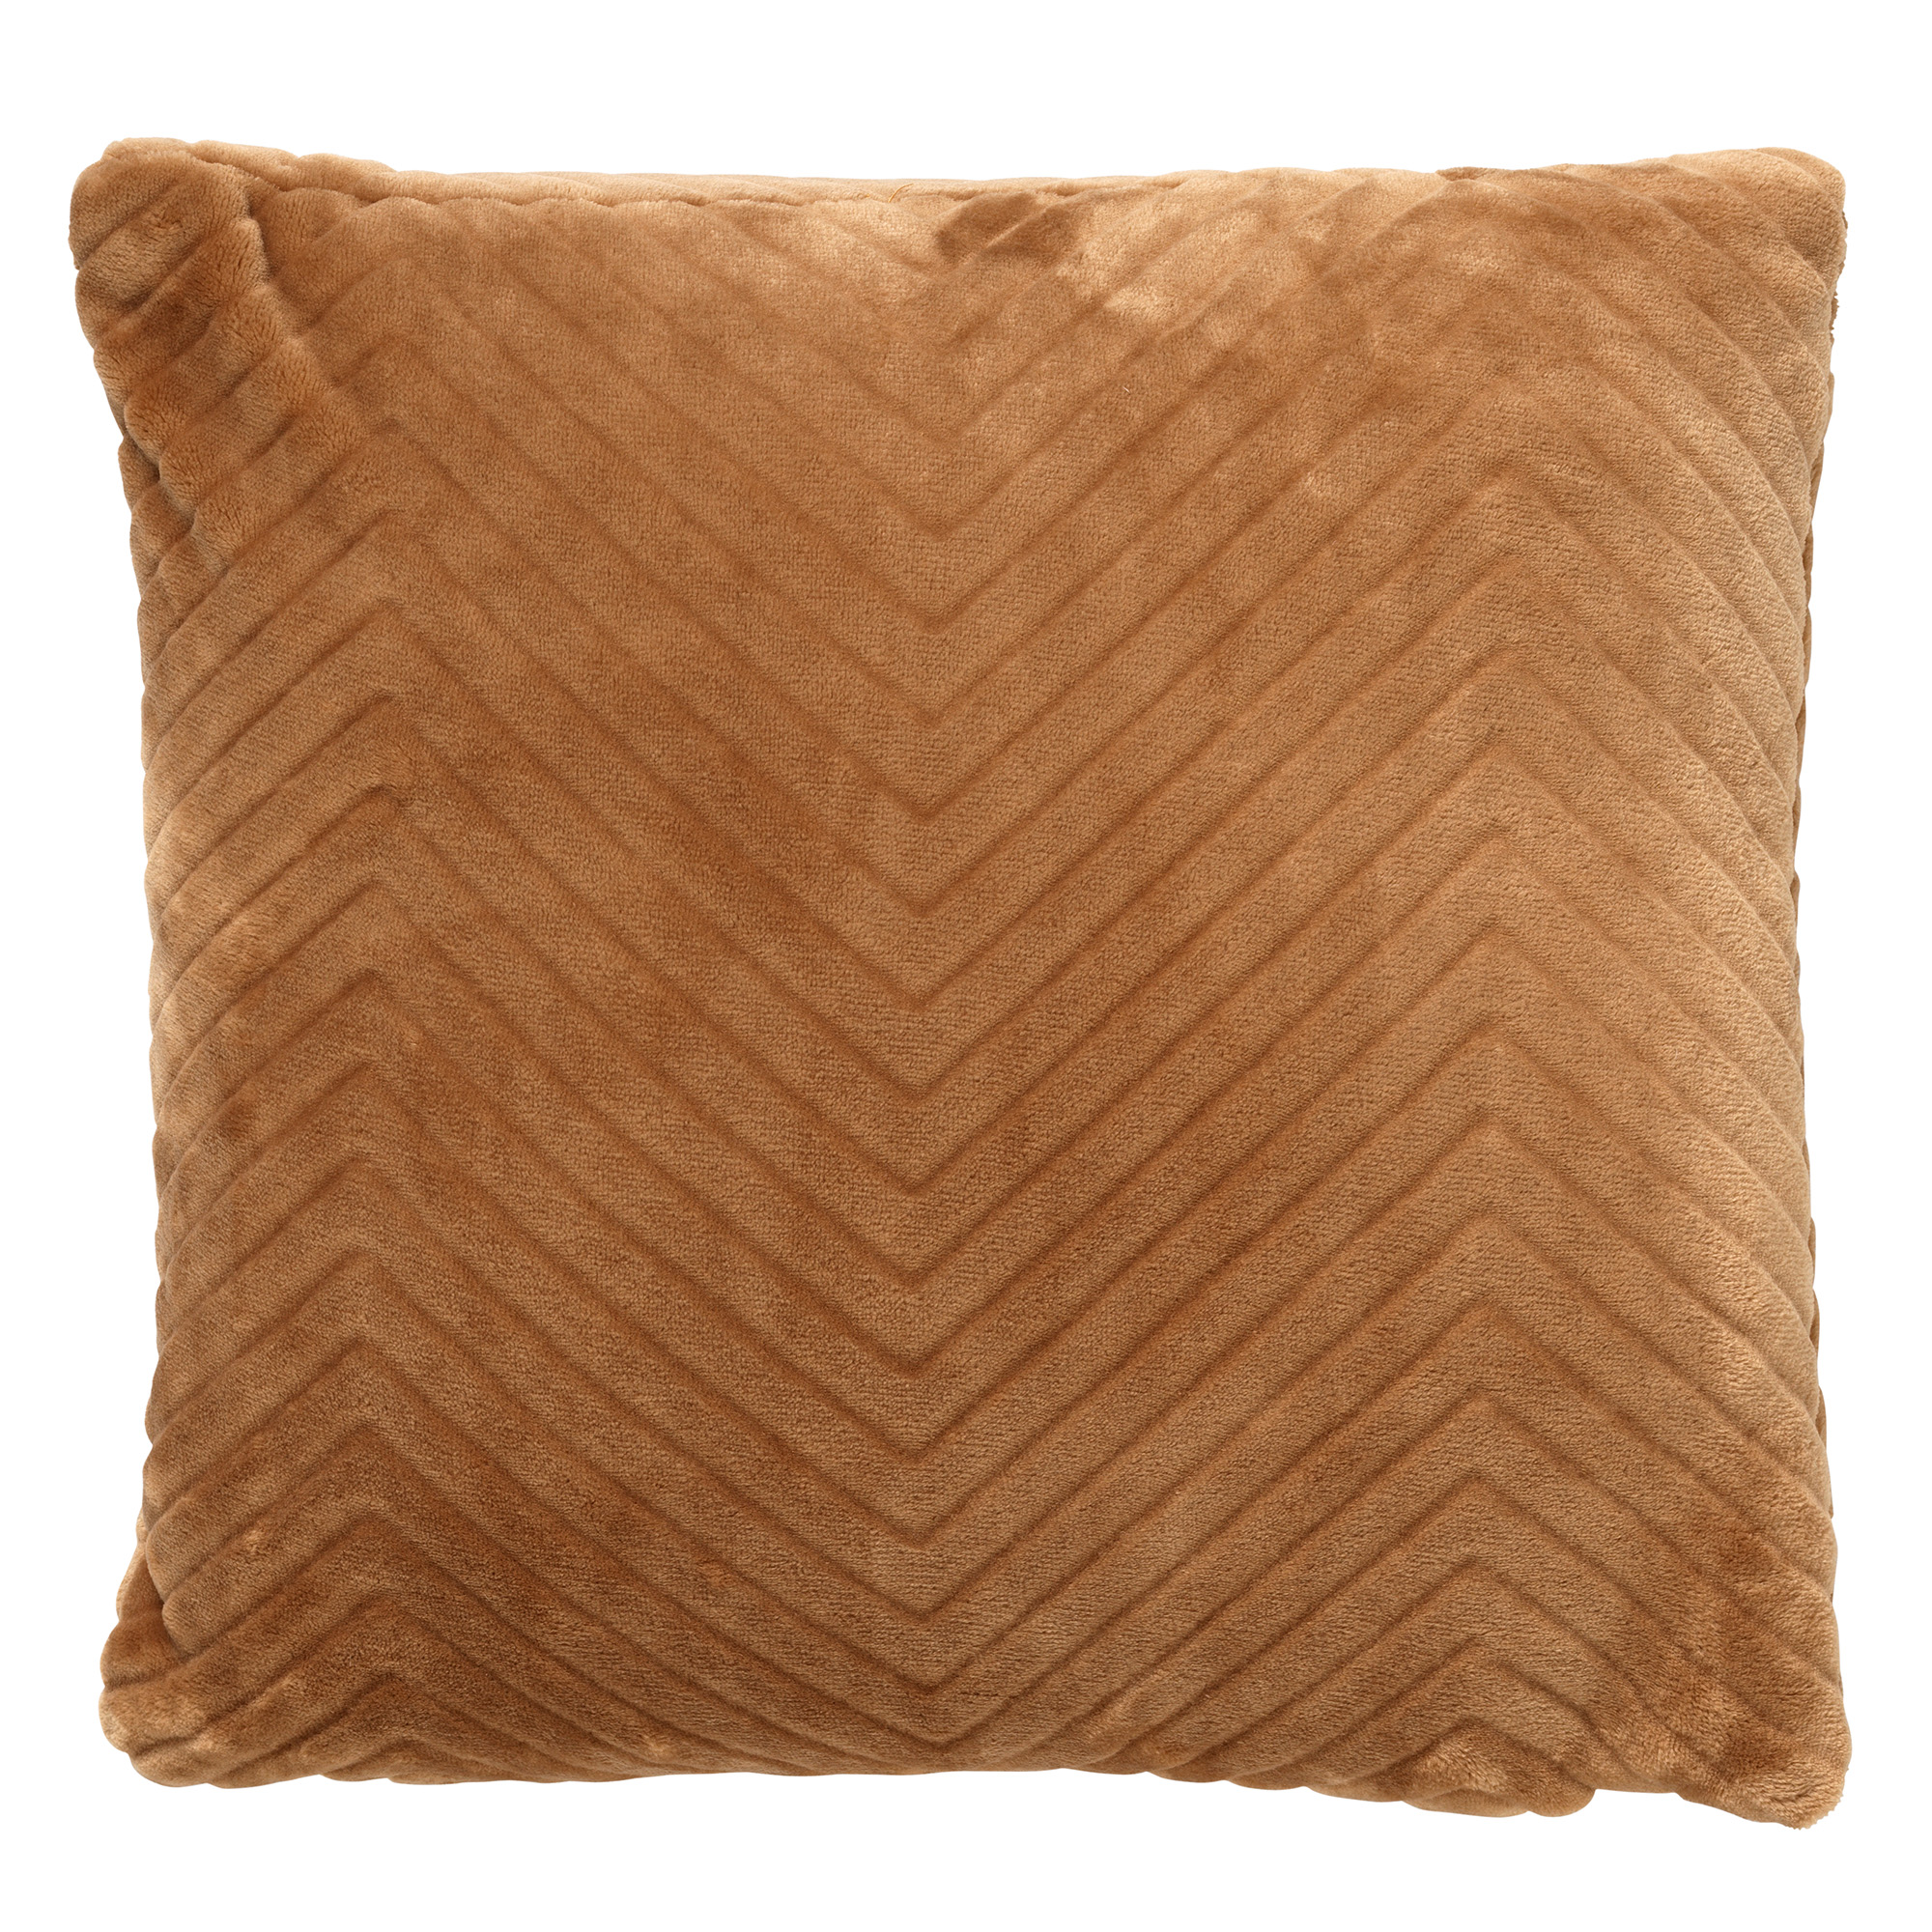 ZICO - Cushion cover with pattern 45x45 cm Tobacco Brown